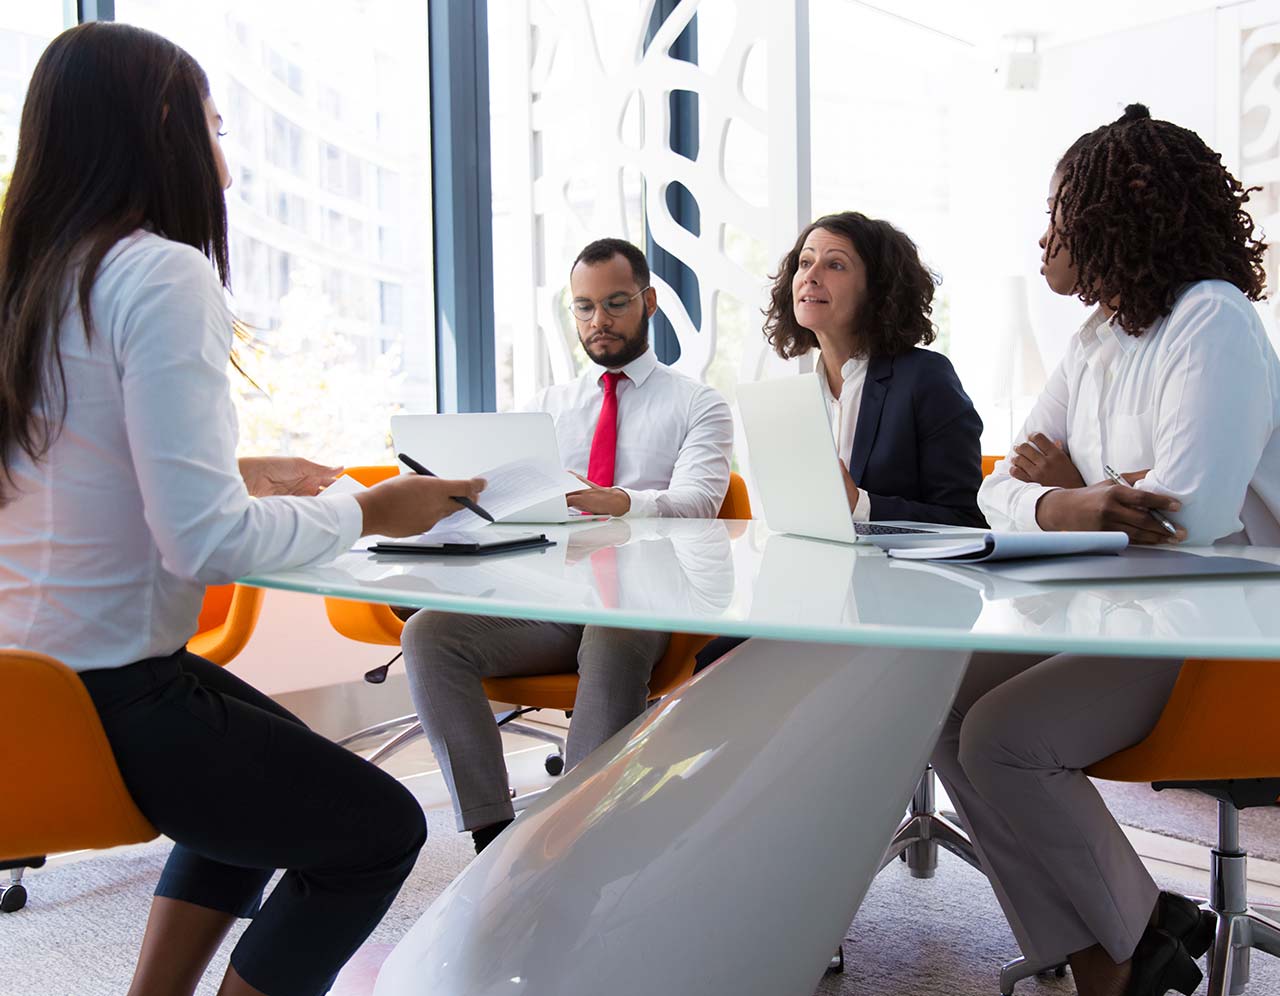 Focus groups with The Kaleidoscope Group and one-on-one interviews are powerful tools to gather employee feedback on important Diversity, Equity and Inclusion topics.